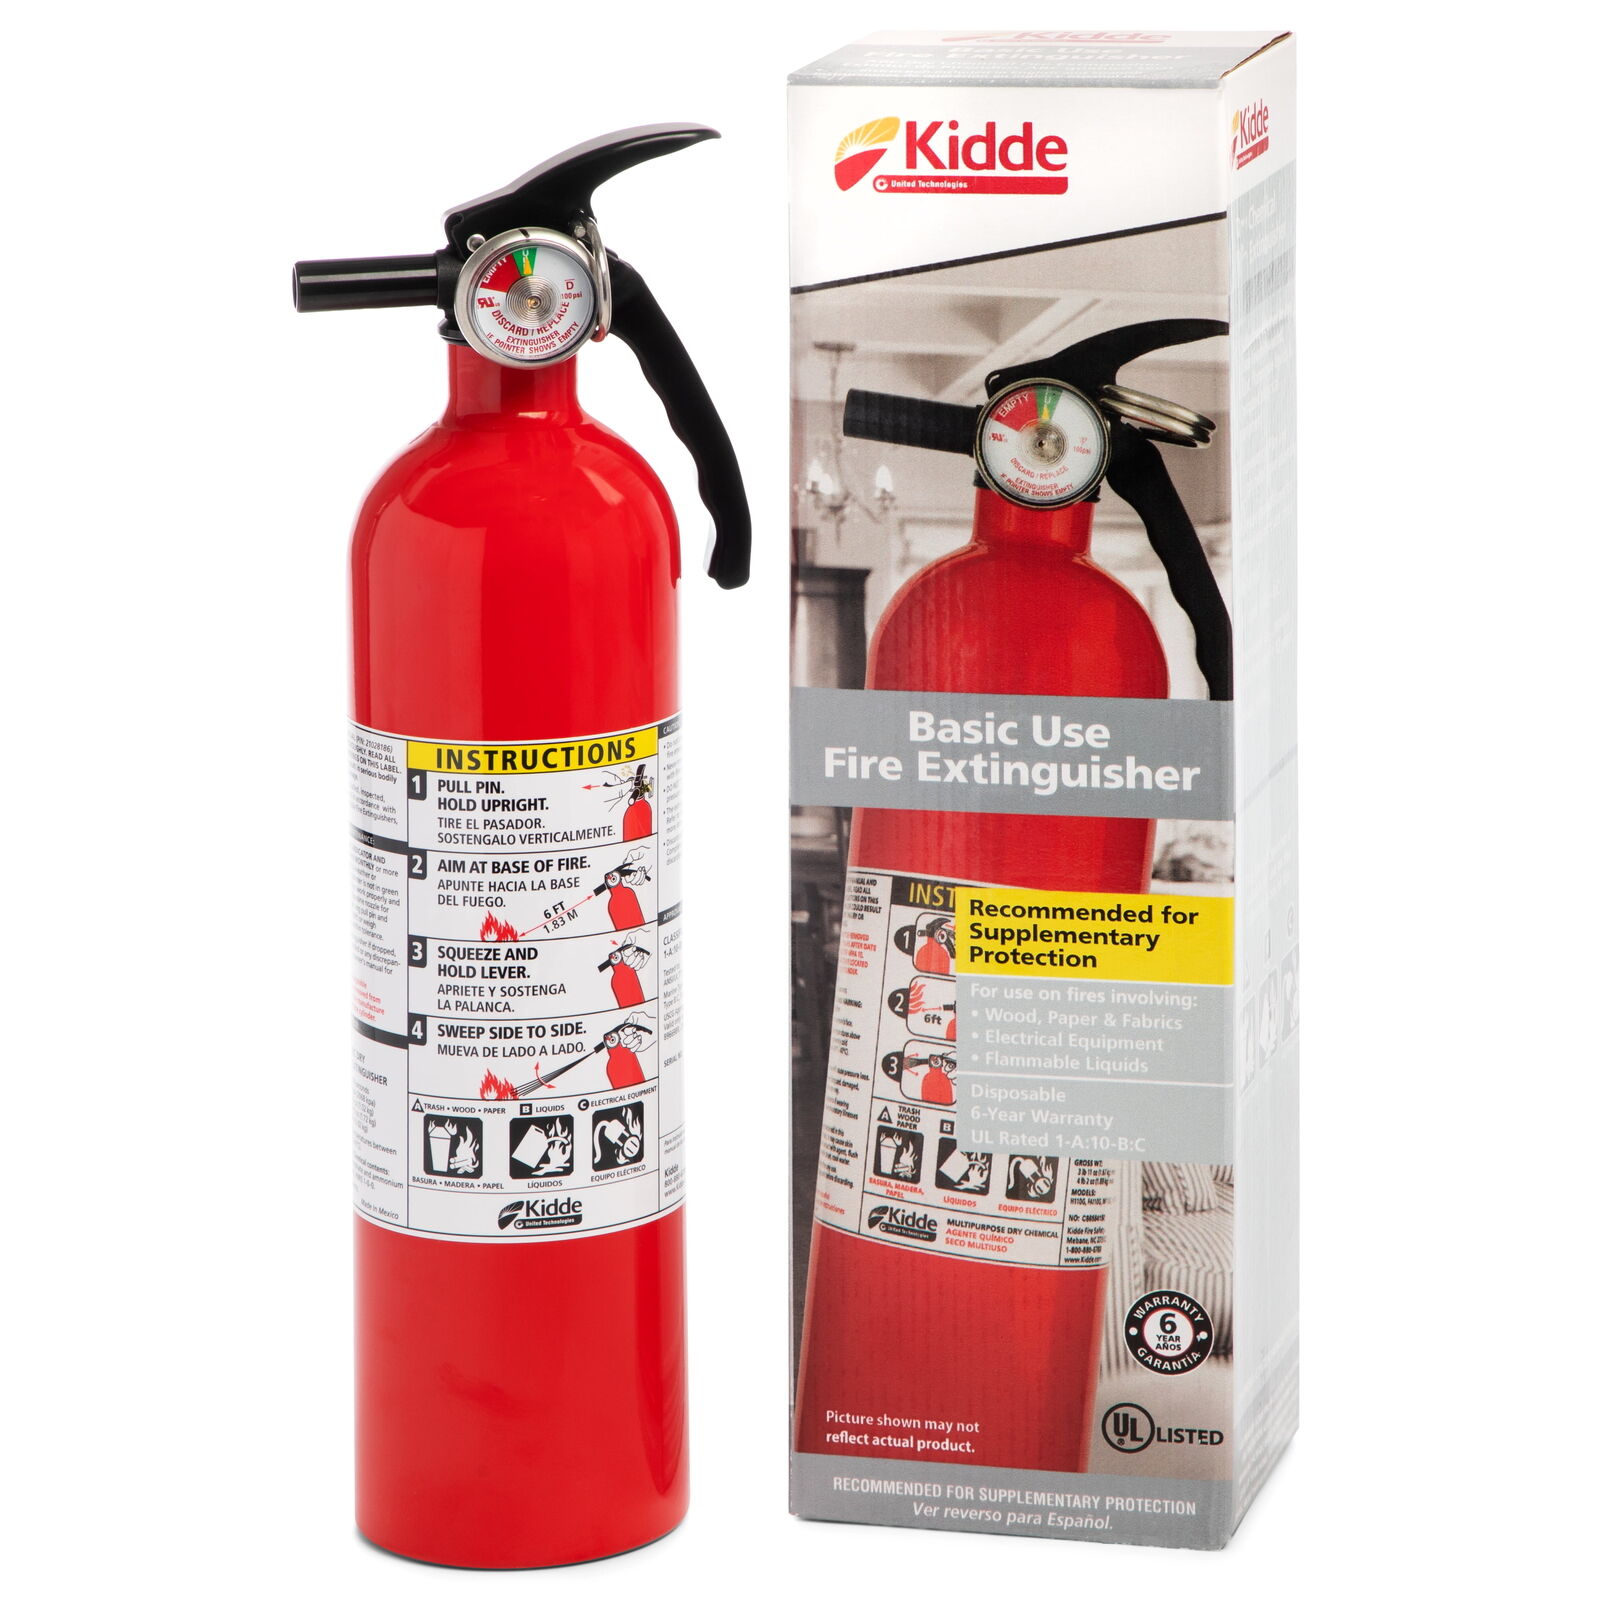 Multipurpose Home Fire Extinguisher, UL Rated 1-A:10-B:C, Model KD82-110ABC